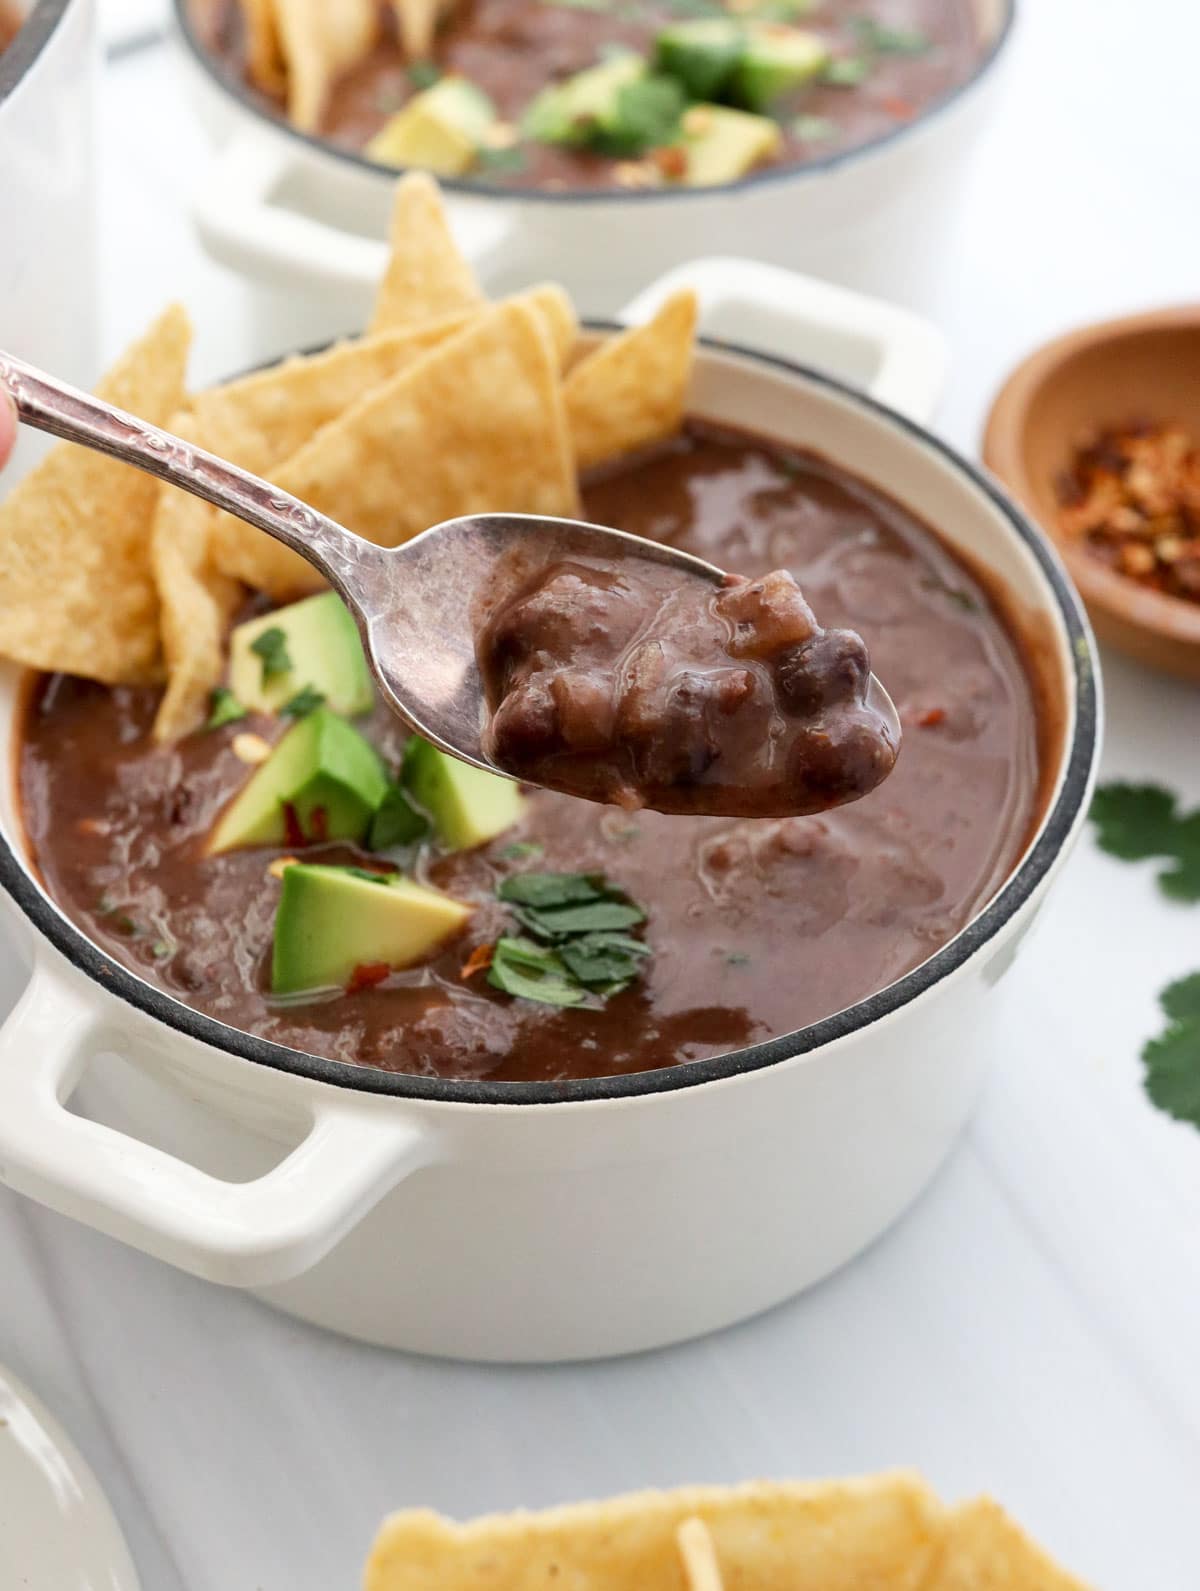 black bean soup lifted up on spoon.